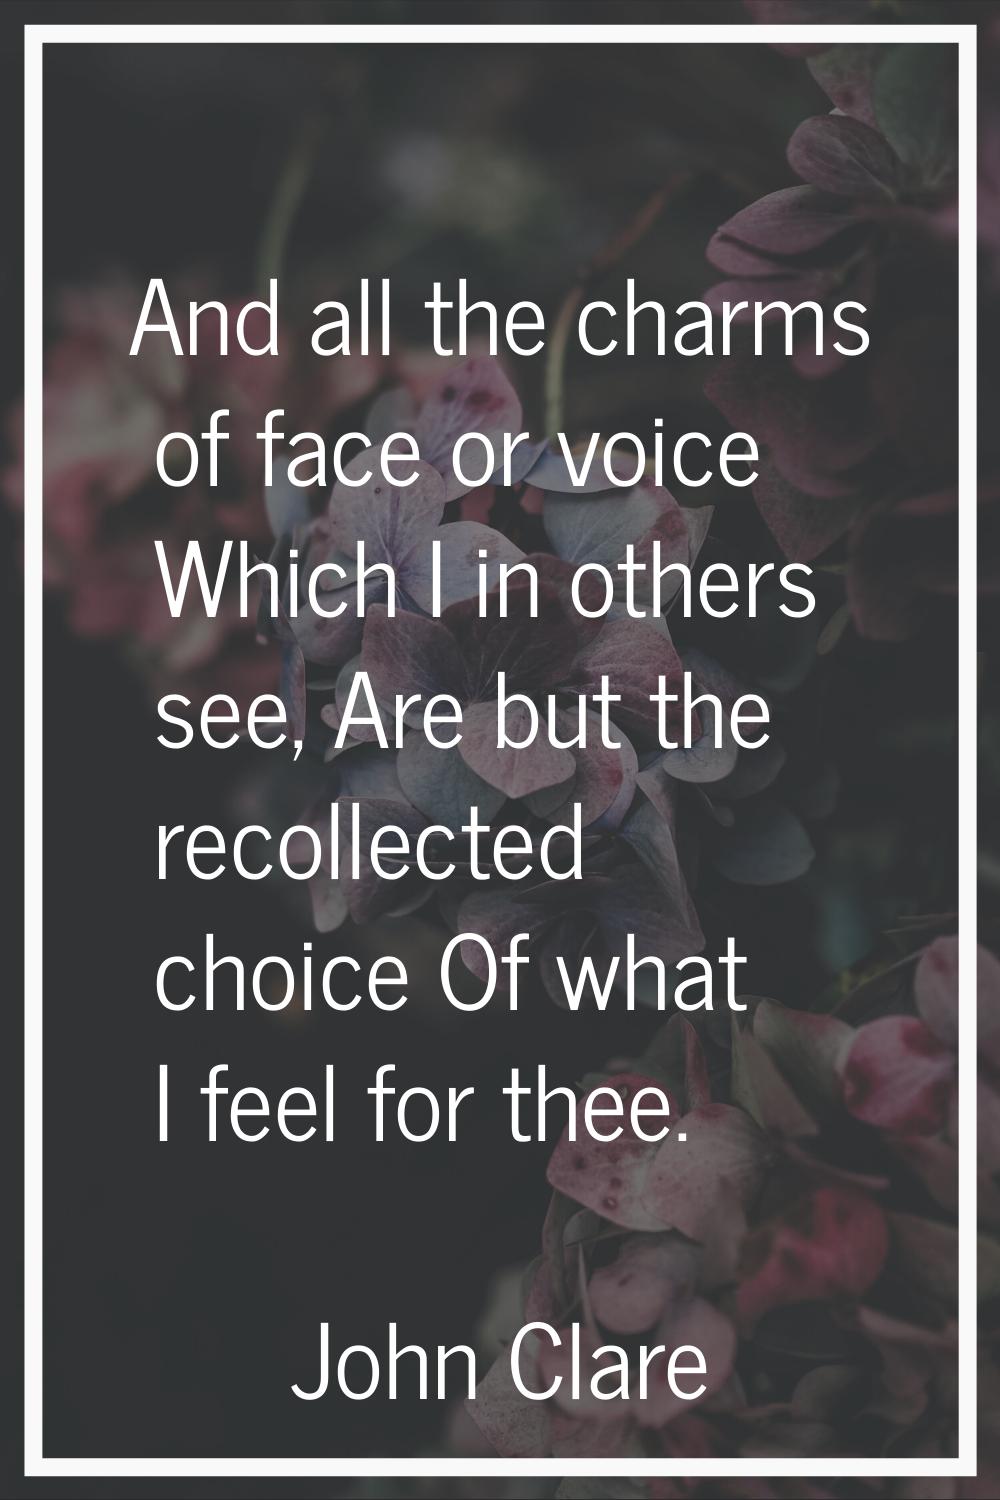 And all the charms of face or voice Which I in others see, Are but the recollected choice Of what I